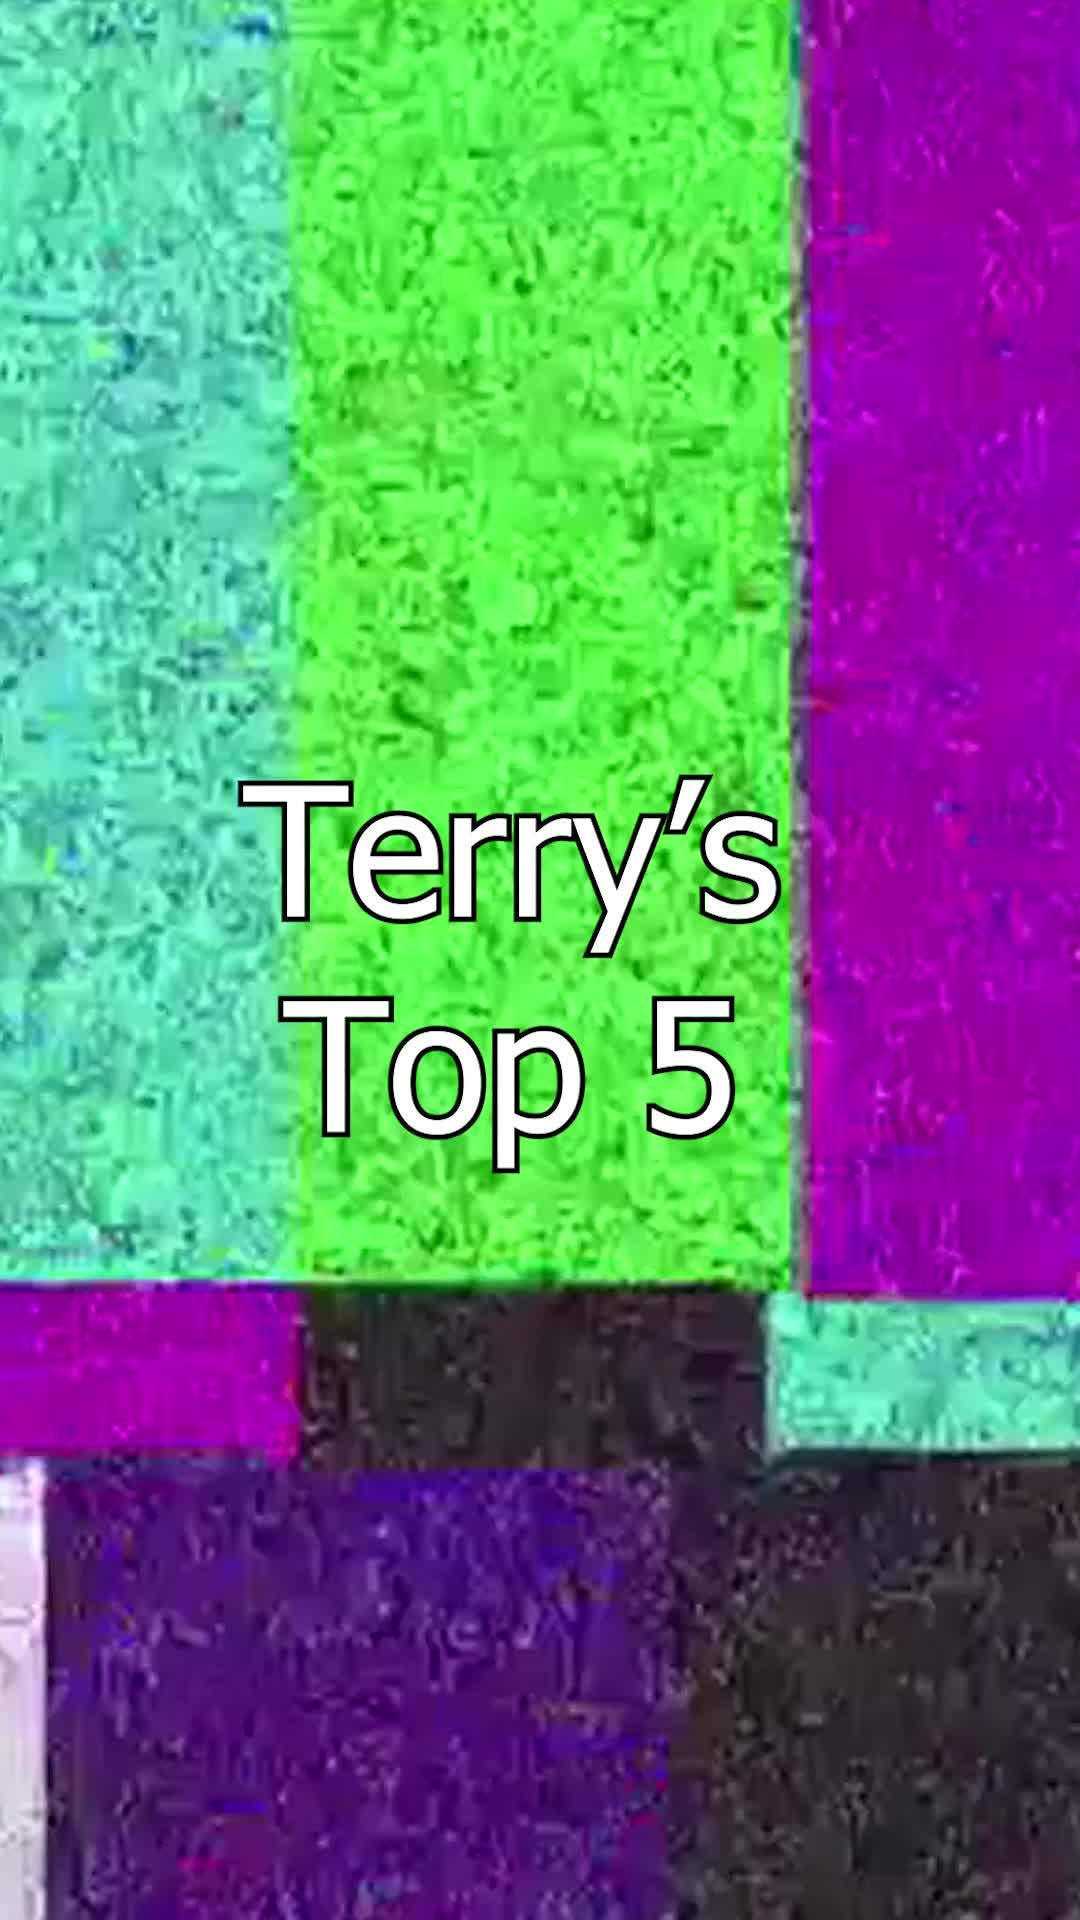 Terry's Top 5 COMMUNITY clips ft. Saves - #nhl  #nhl23  #hockey #icehockey #hockey  #fyp  #gaming  #communityclips  #Saves  #goaliesaves